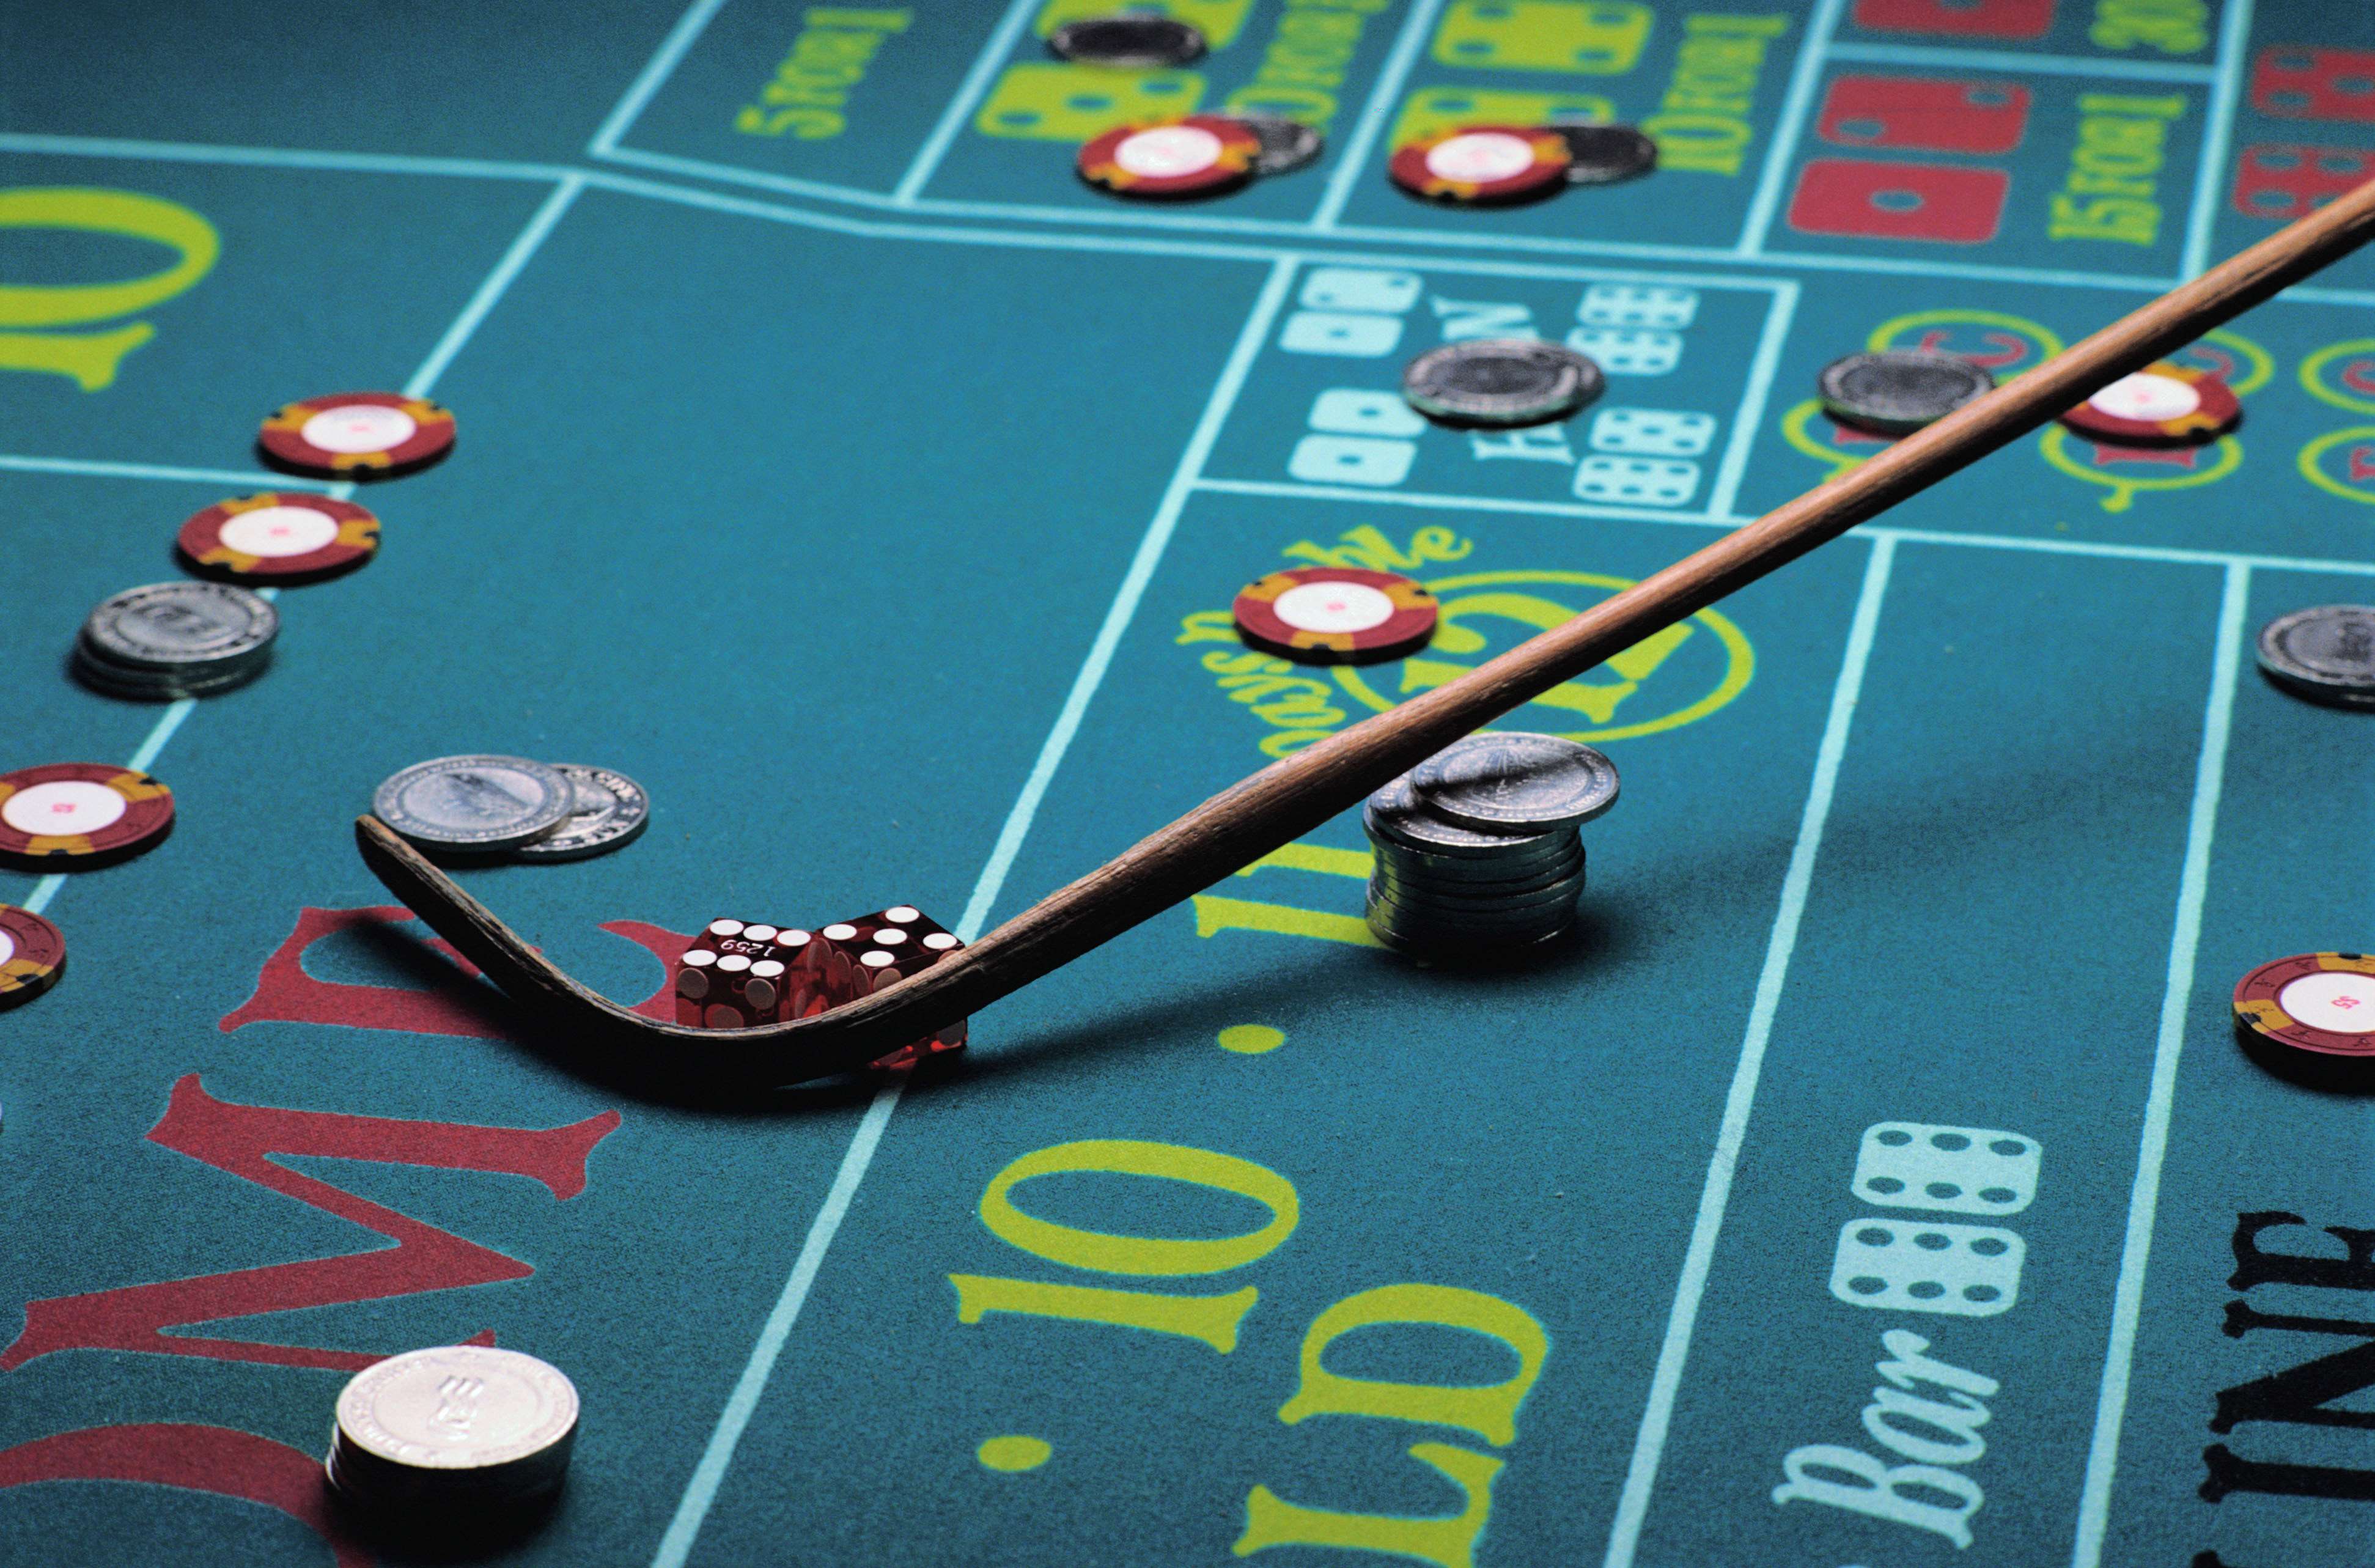 Image of a game in a casino